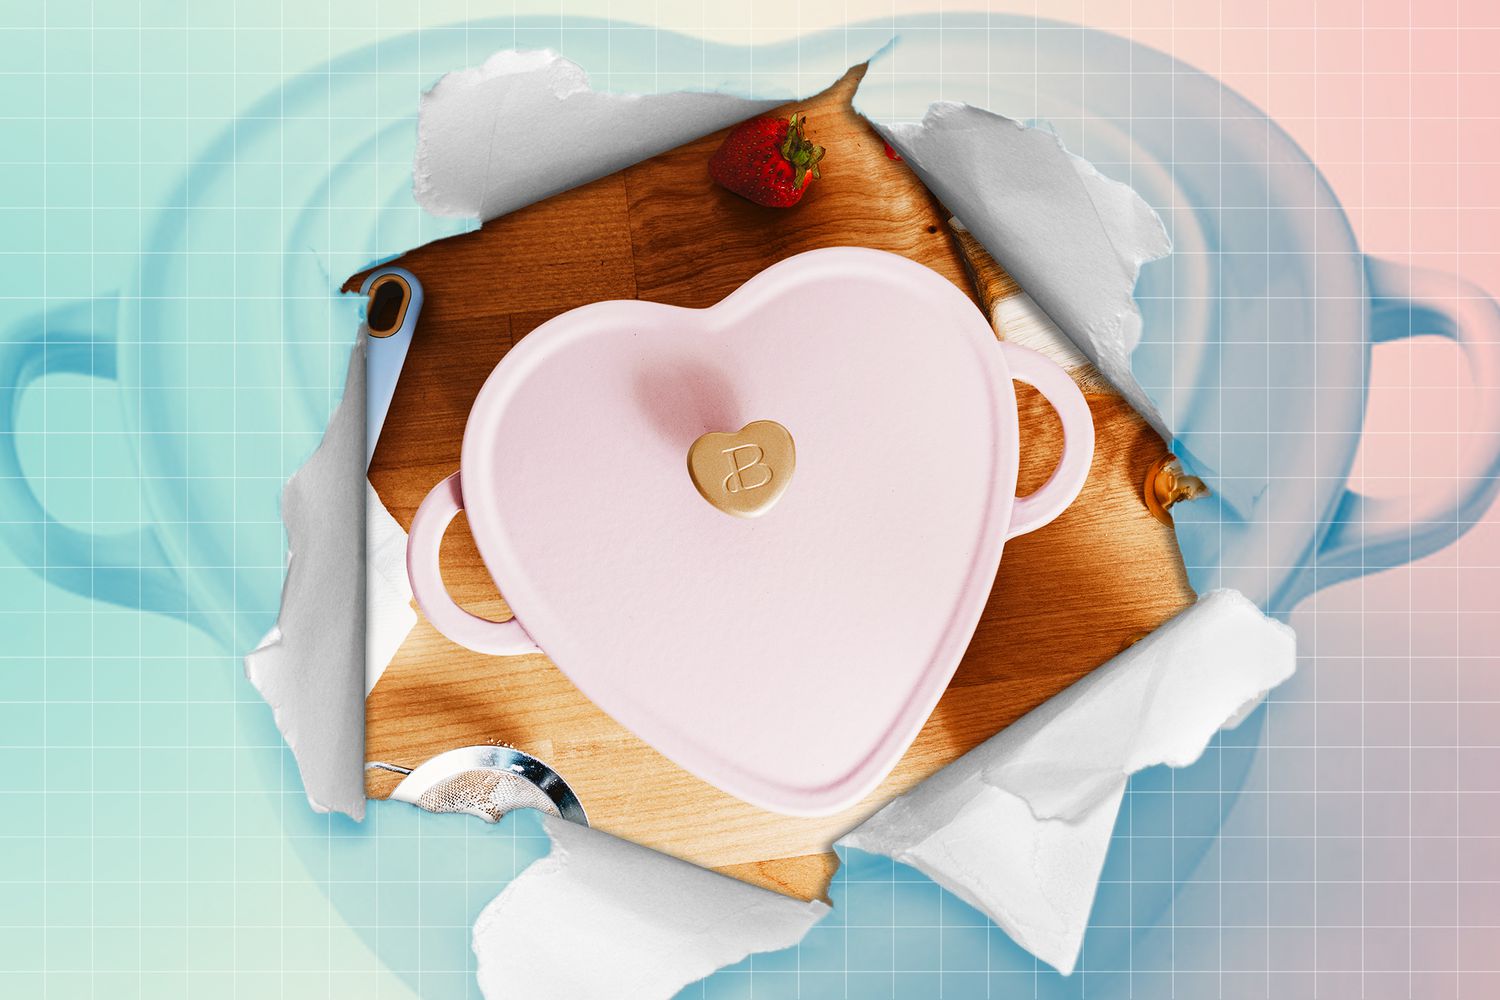 Drew Barrymore's Beautiful heart shaped dutch oven in a cut out